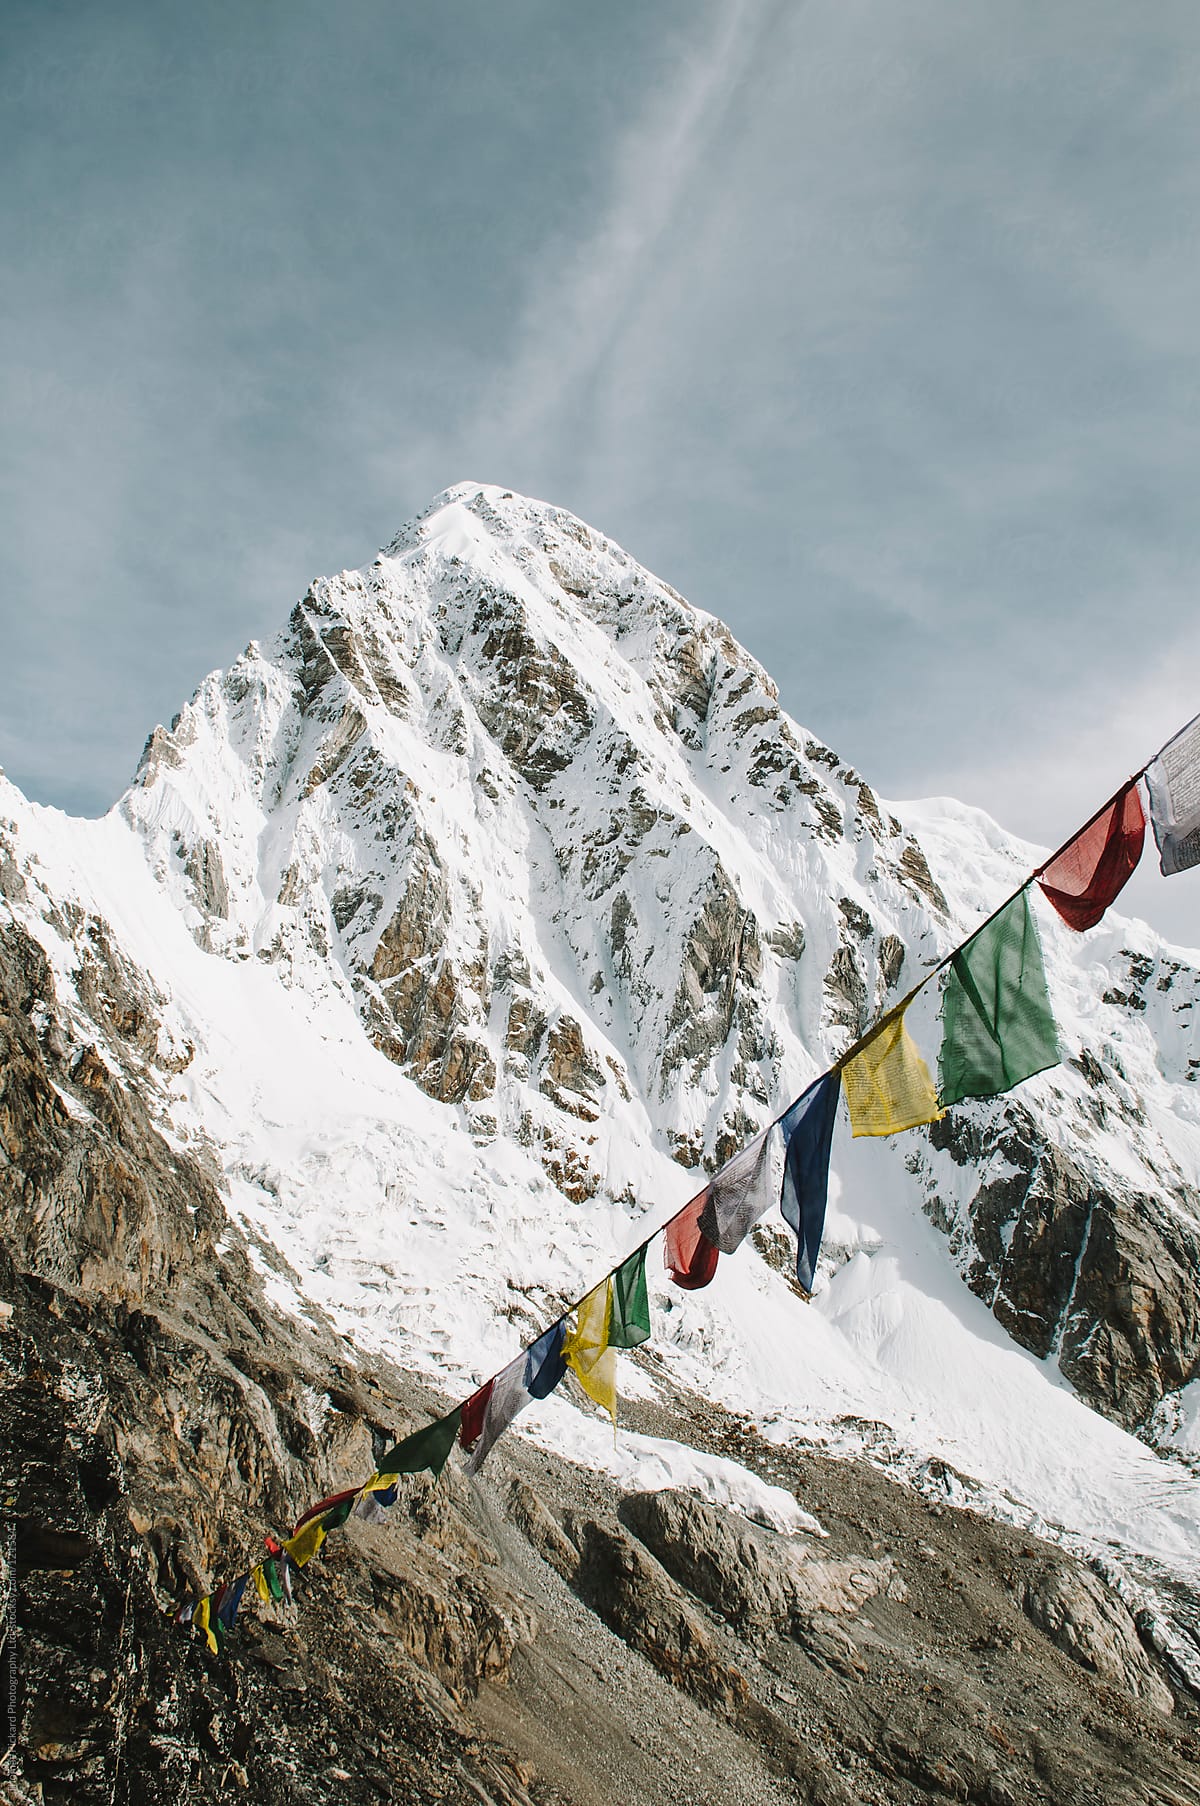 Prayer flags and mountain, Everest Region, Nepal.